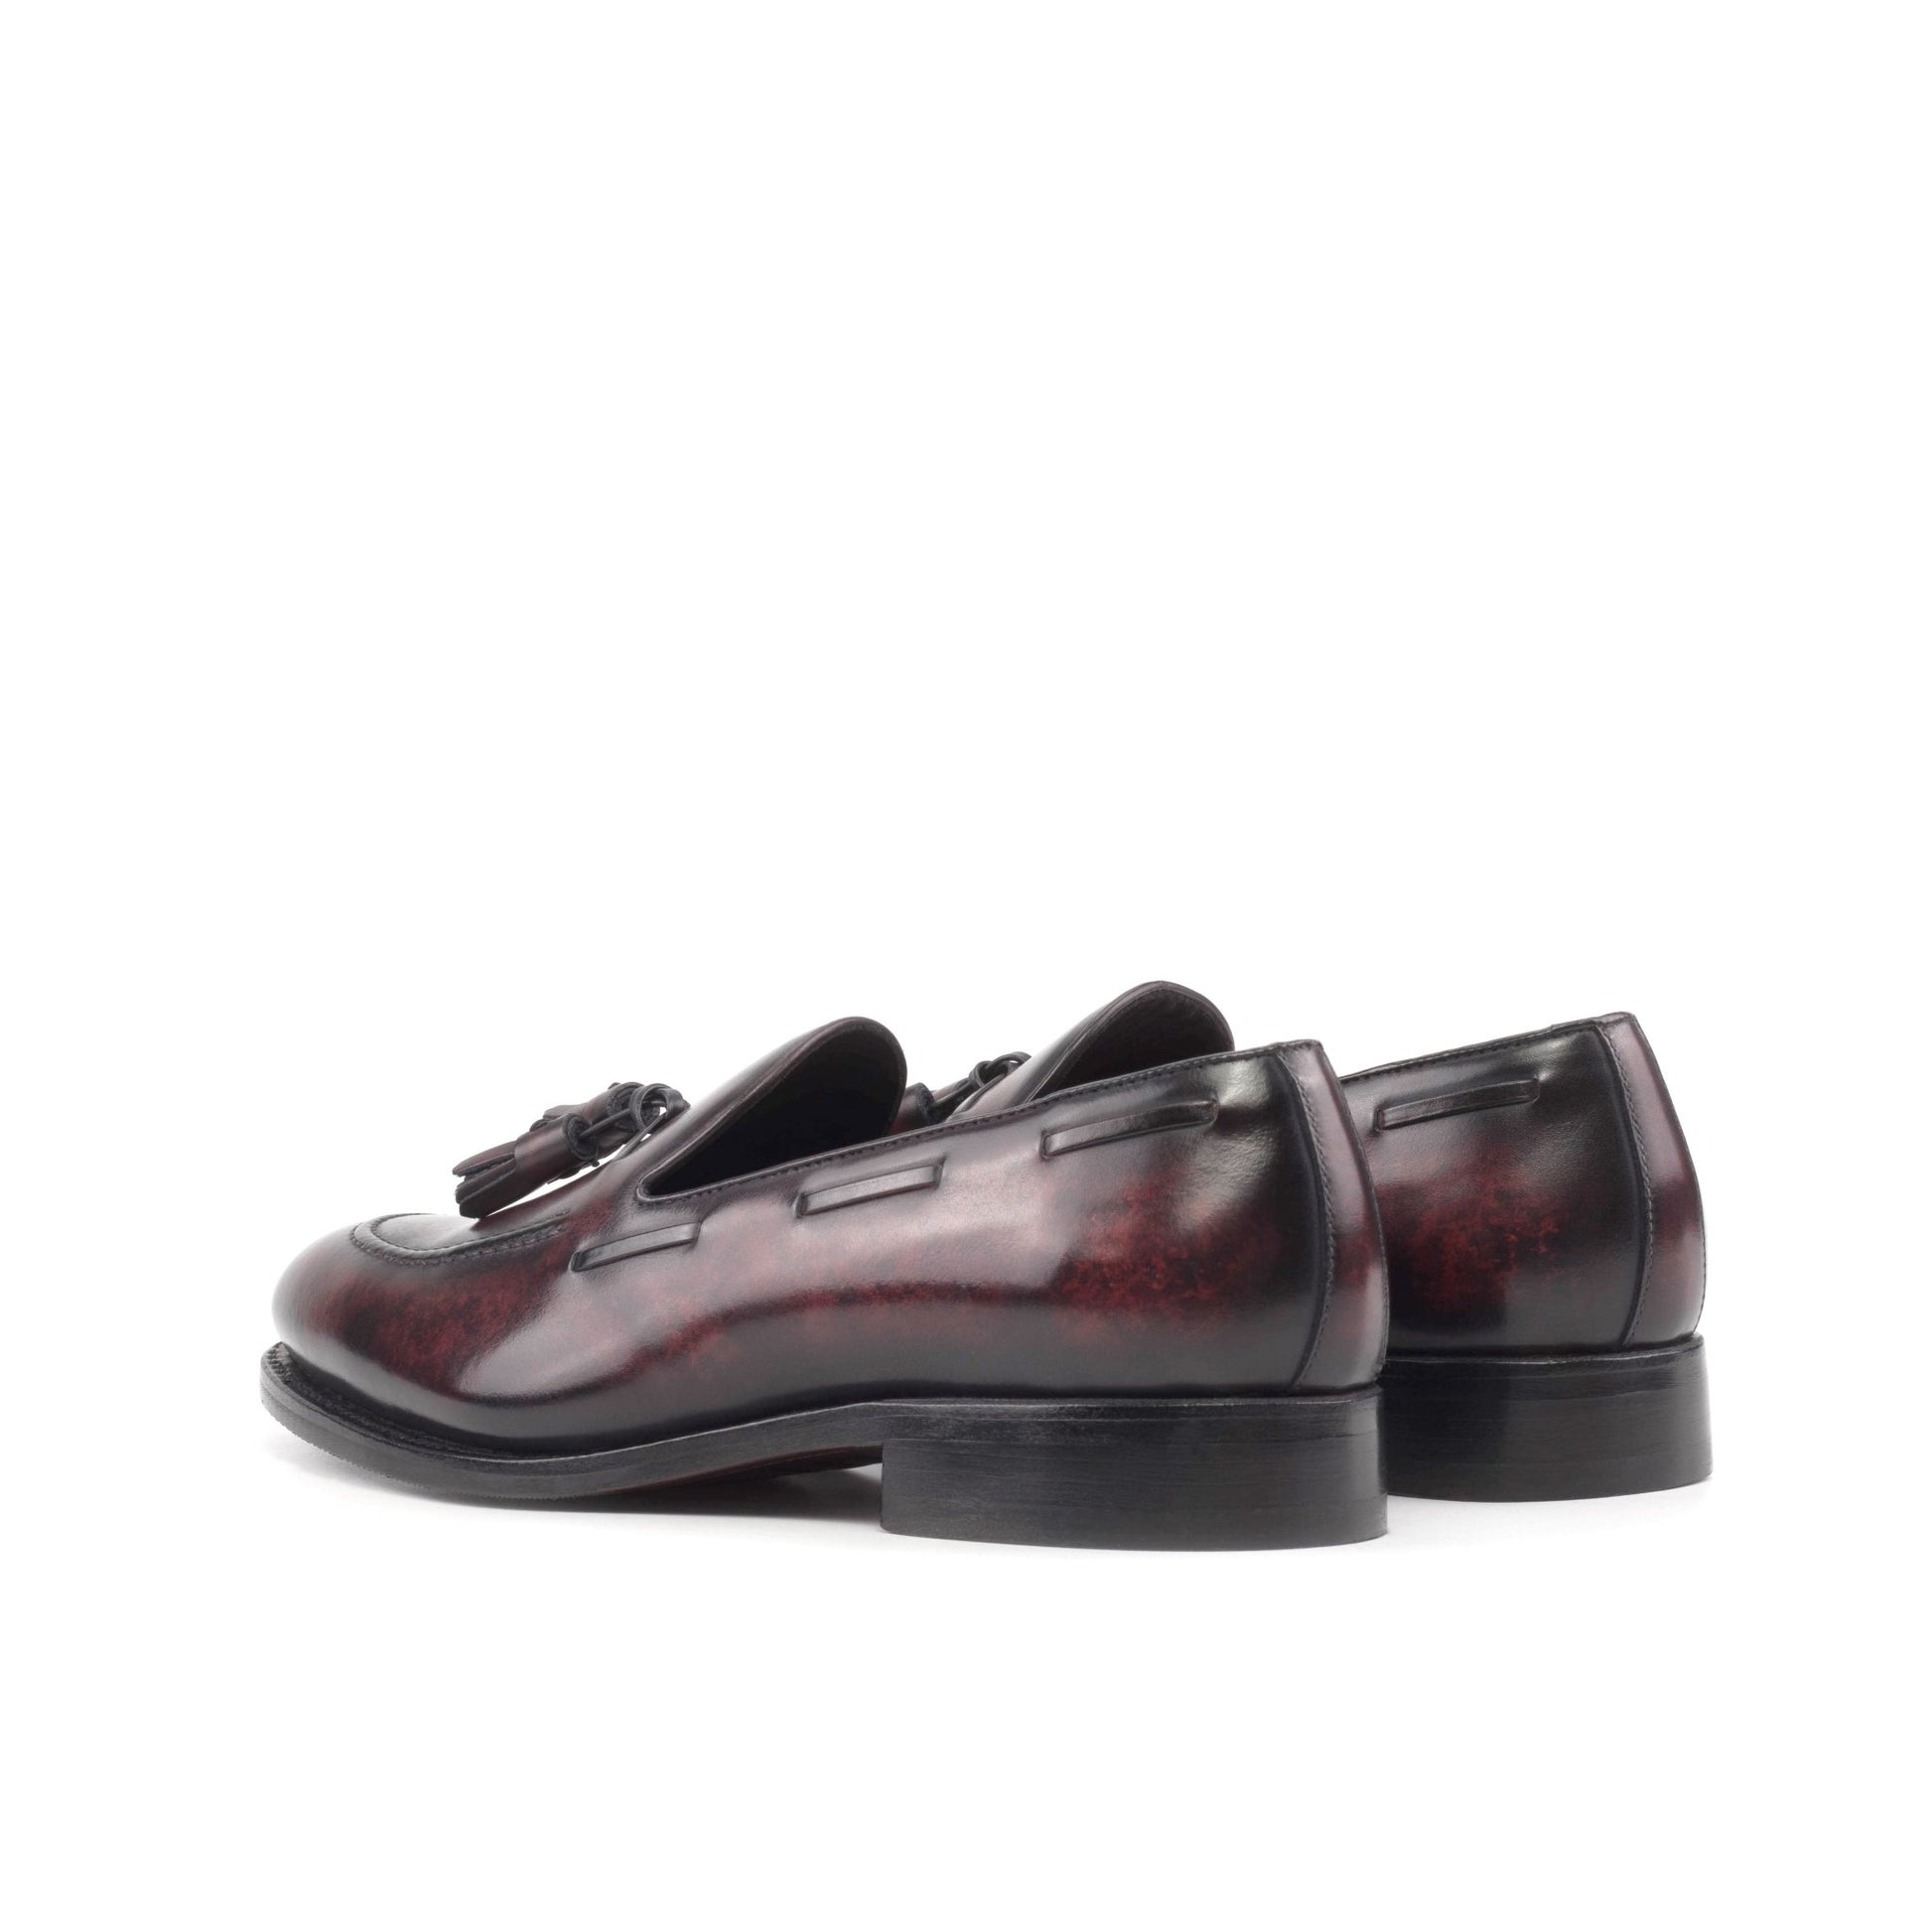 Tassel Loafer in Burgundy Patina - Zatorres | Free Shipping on orders over $200